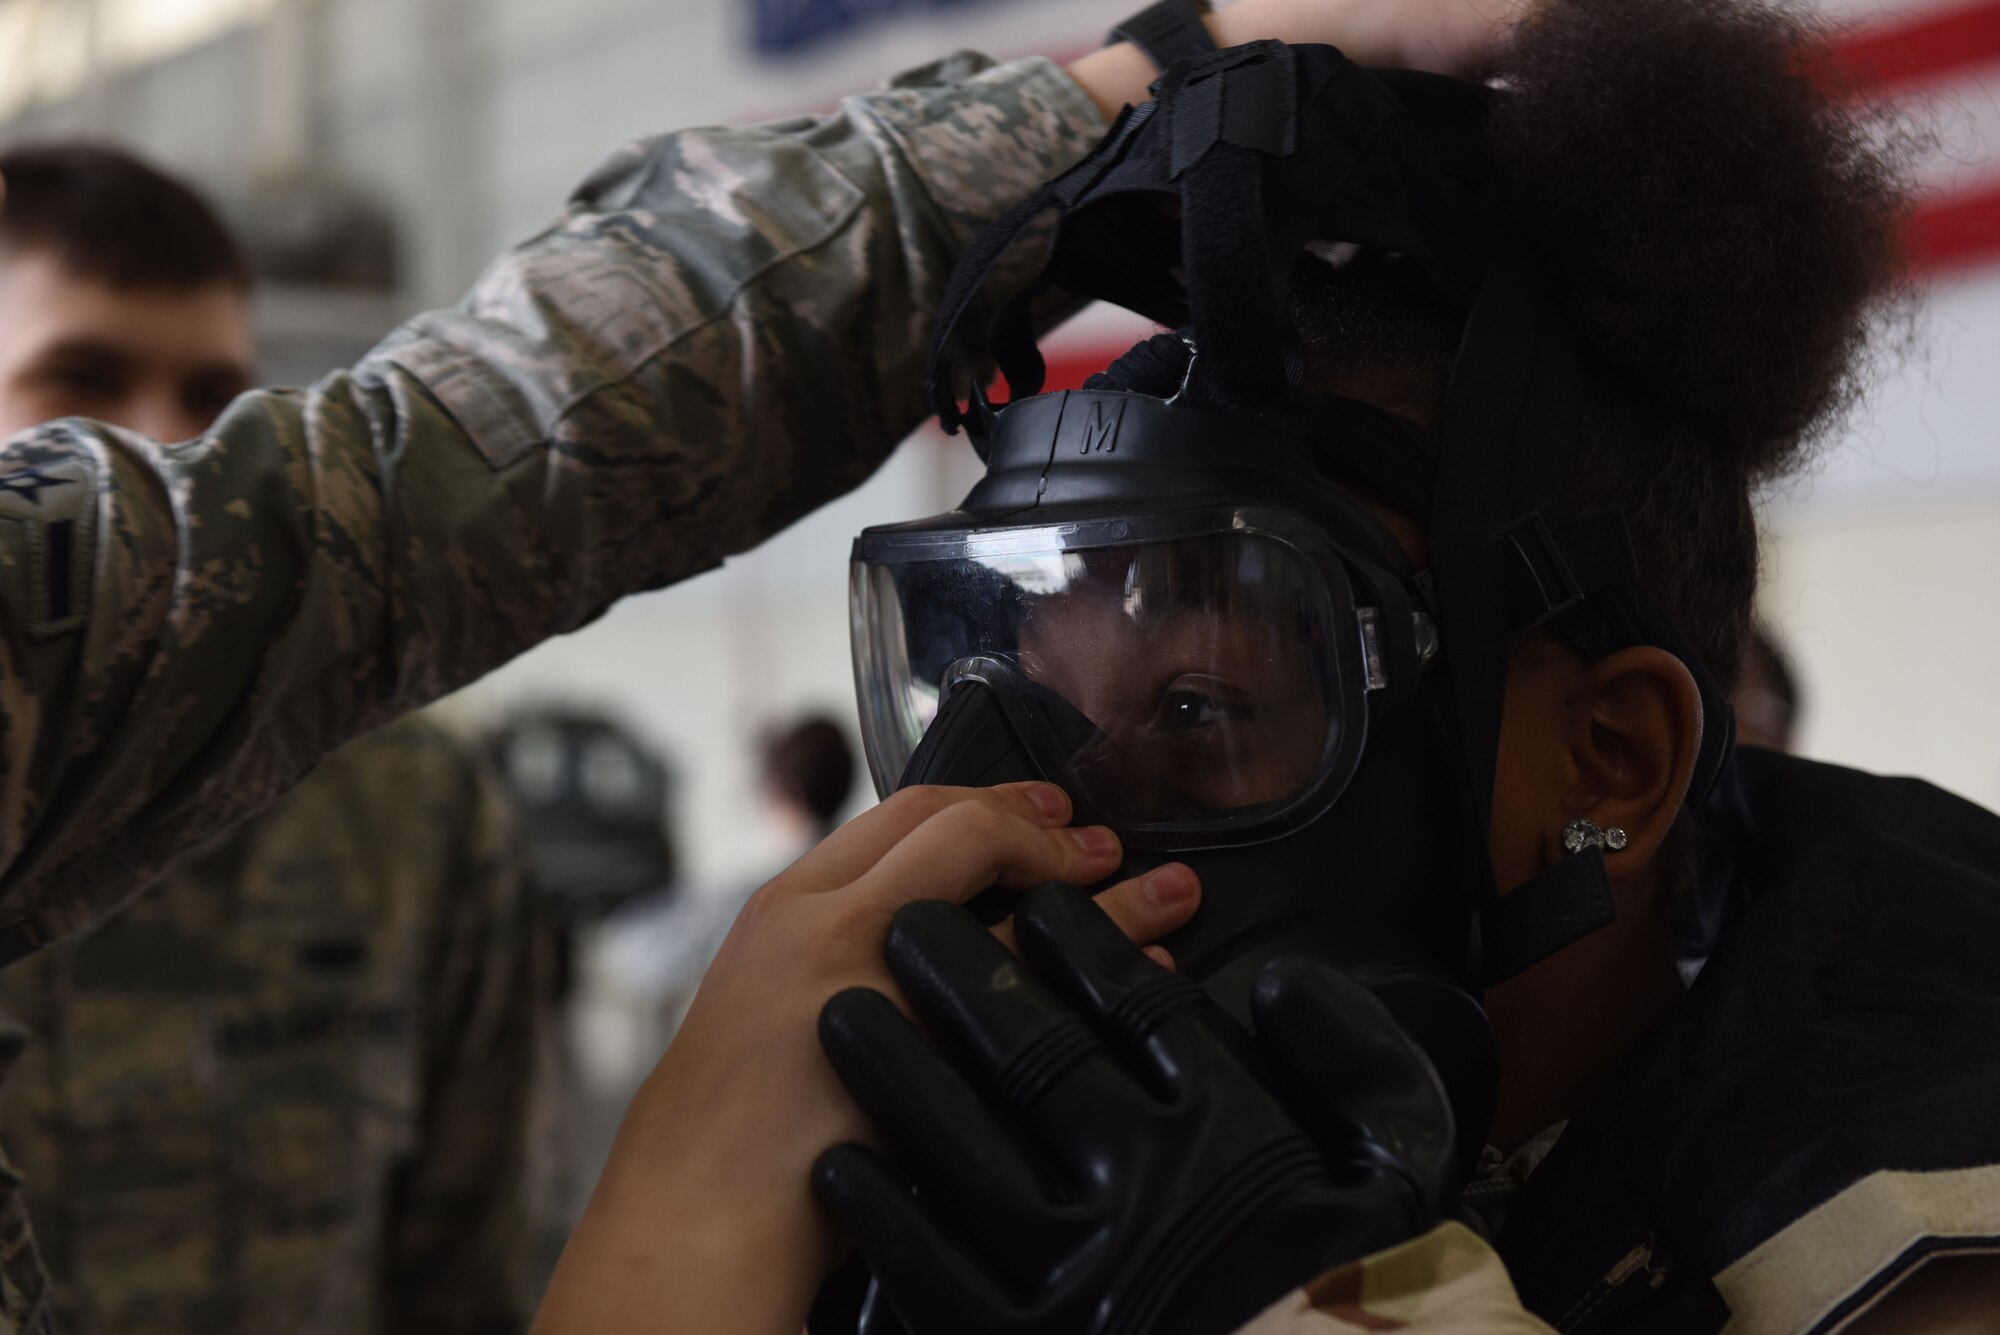 A girl wearing protective military gear puts on a gas mask